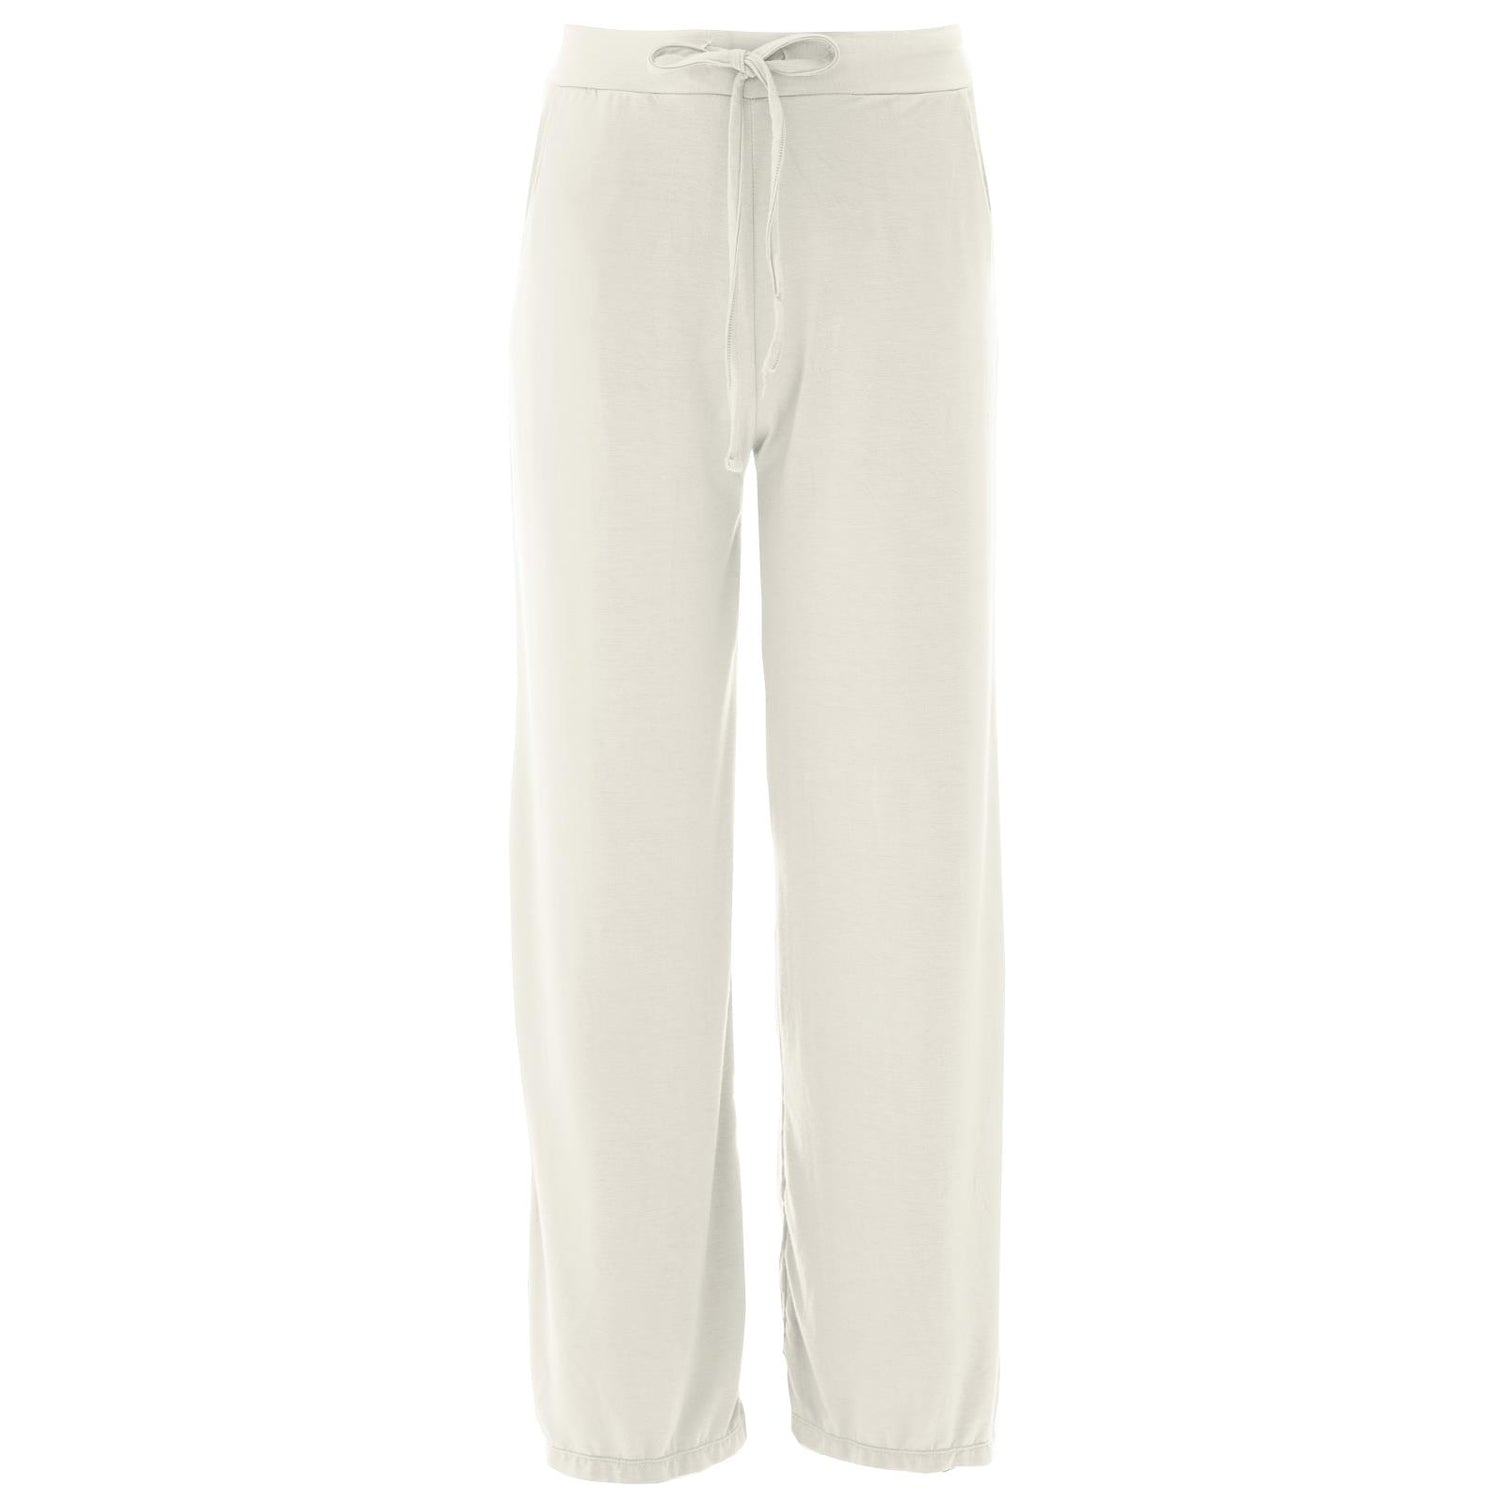 Women's Solid Lounge Pants in Natural